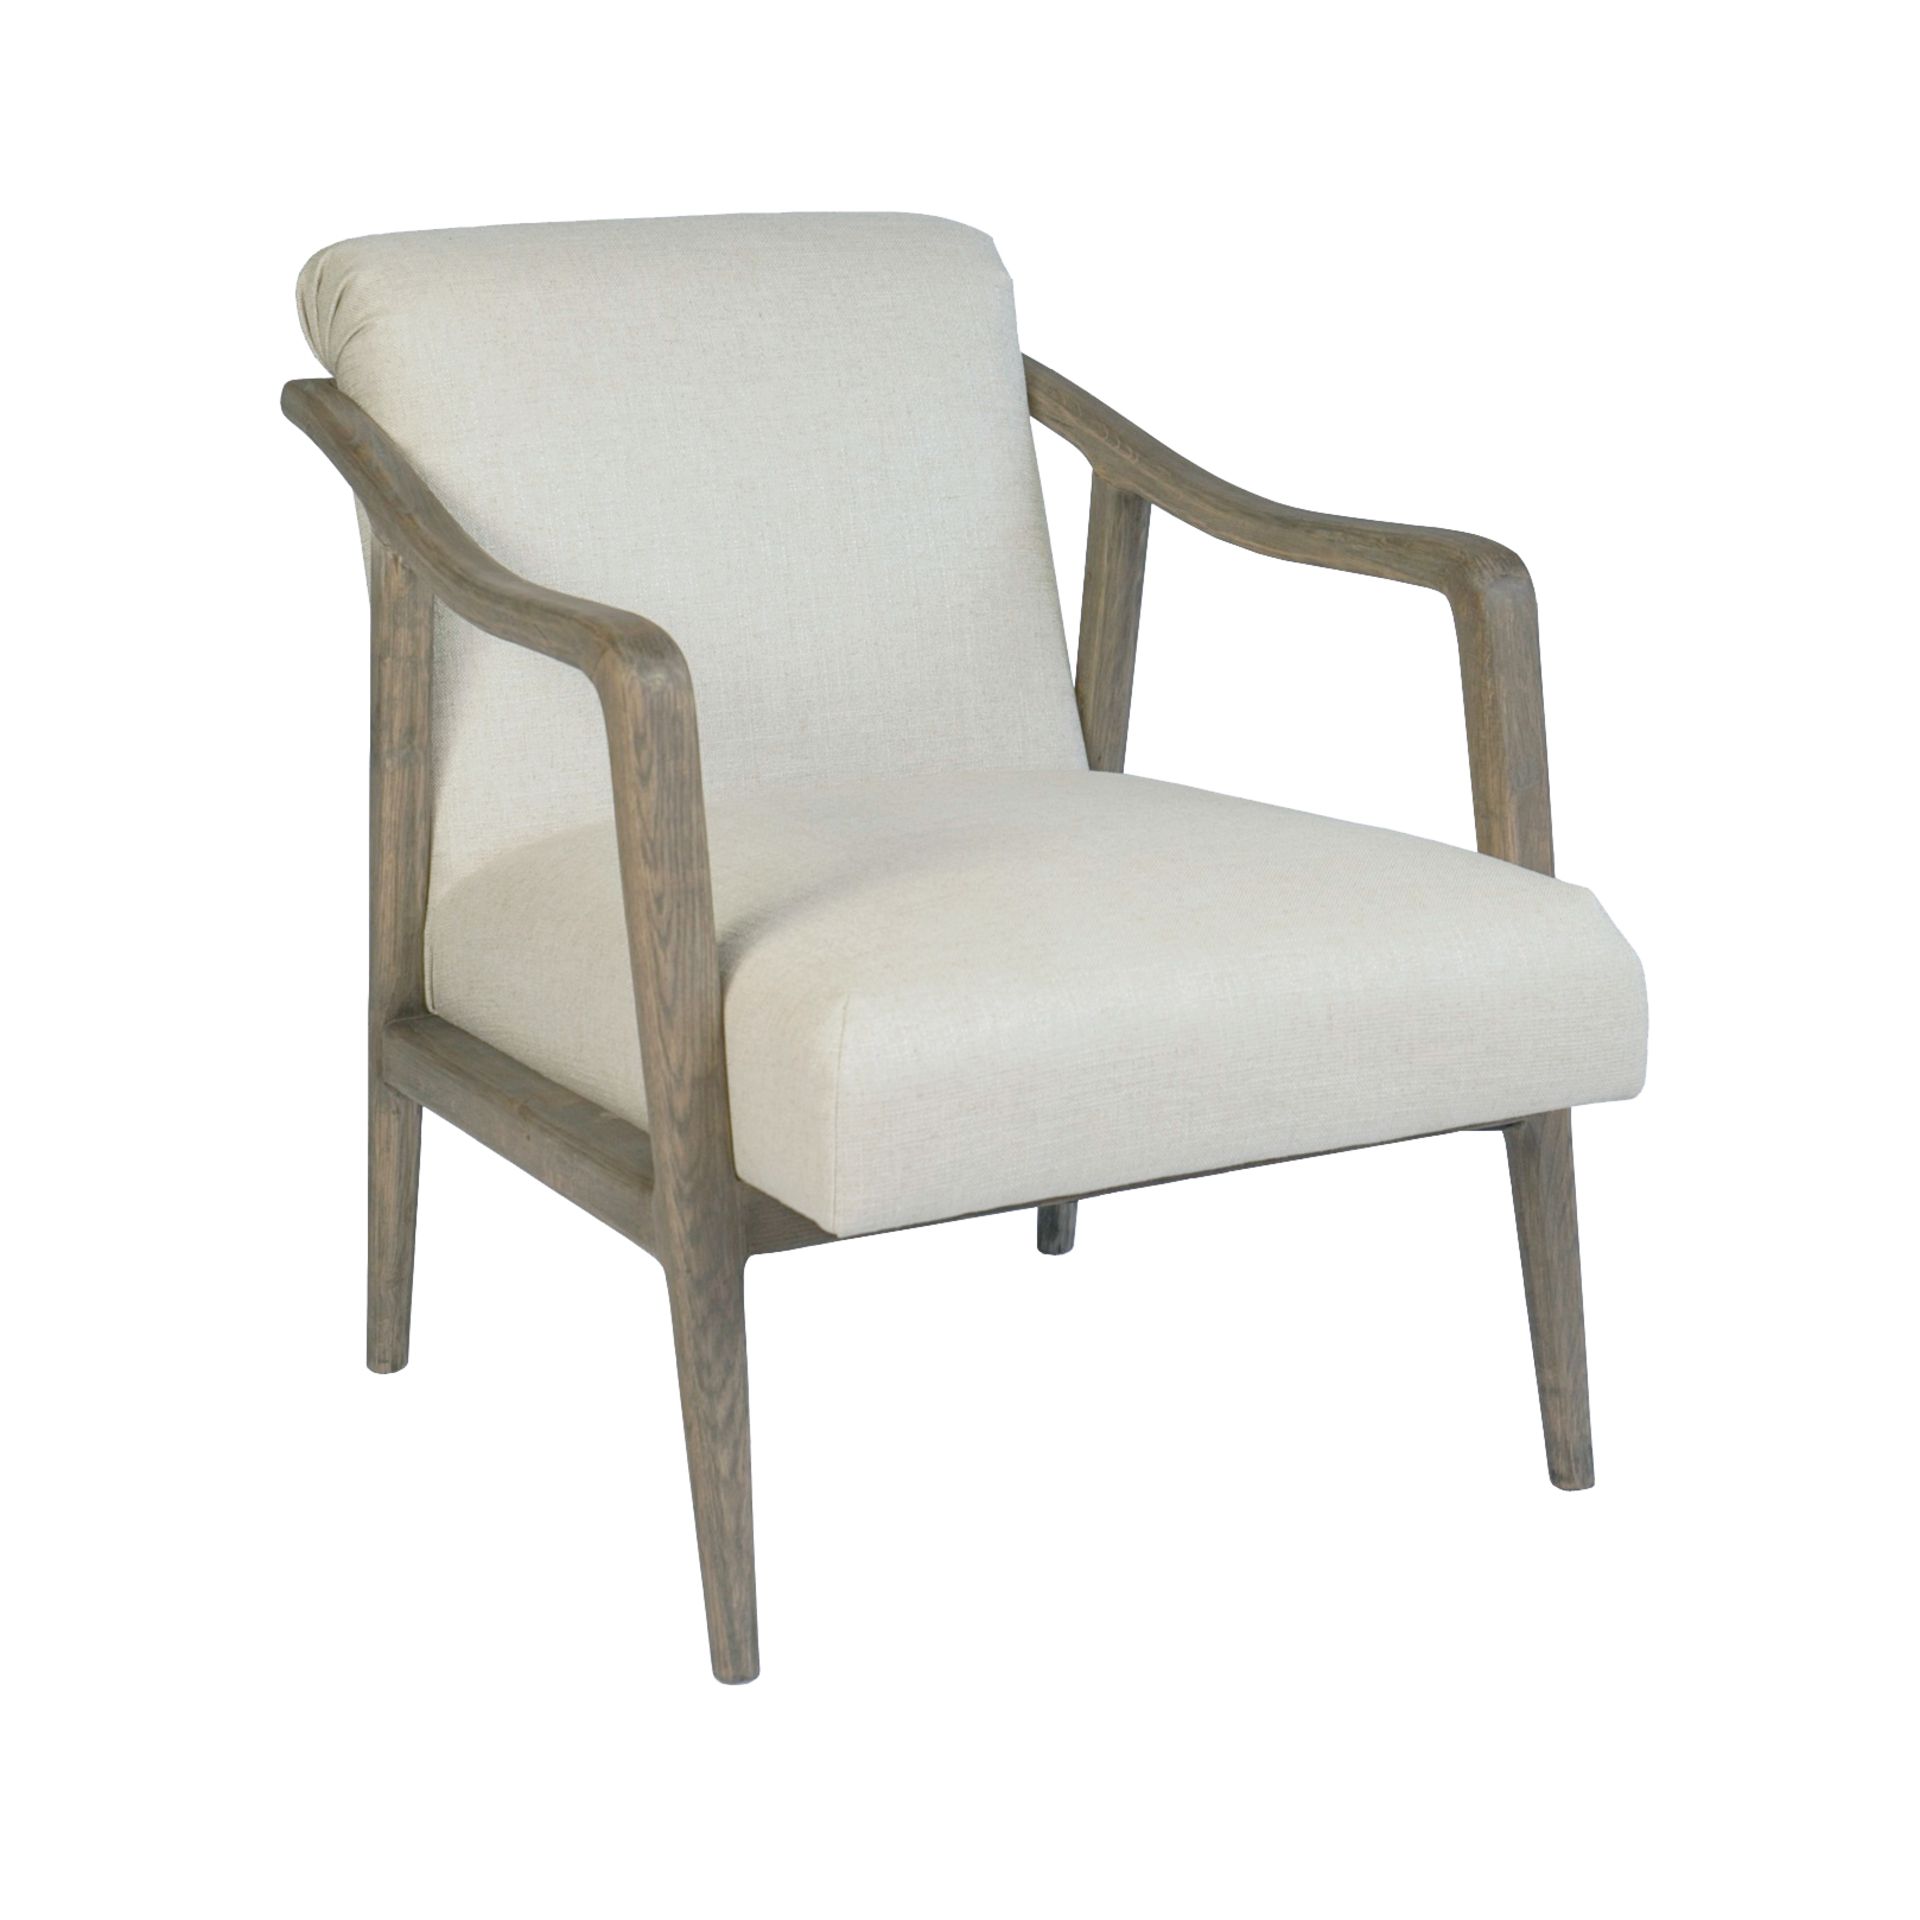 A pair of Alton Natural Ecru Linen Chairs The Alton chair is a classic and sophisticated weathered - Image 5 of 5